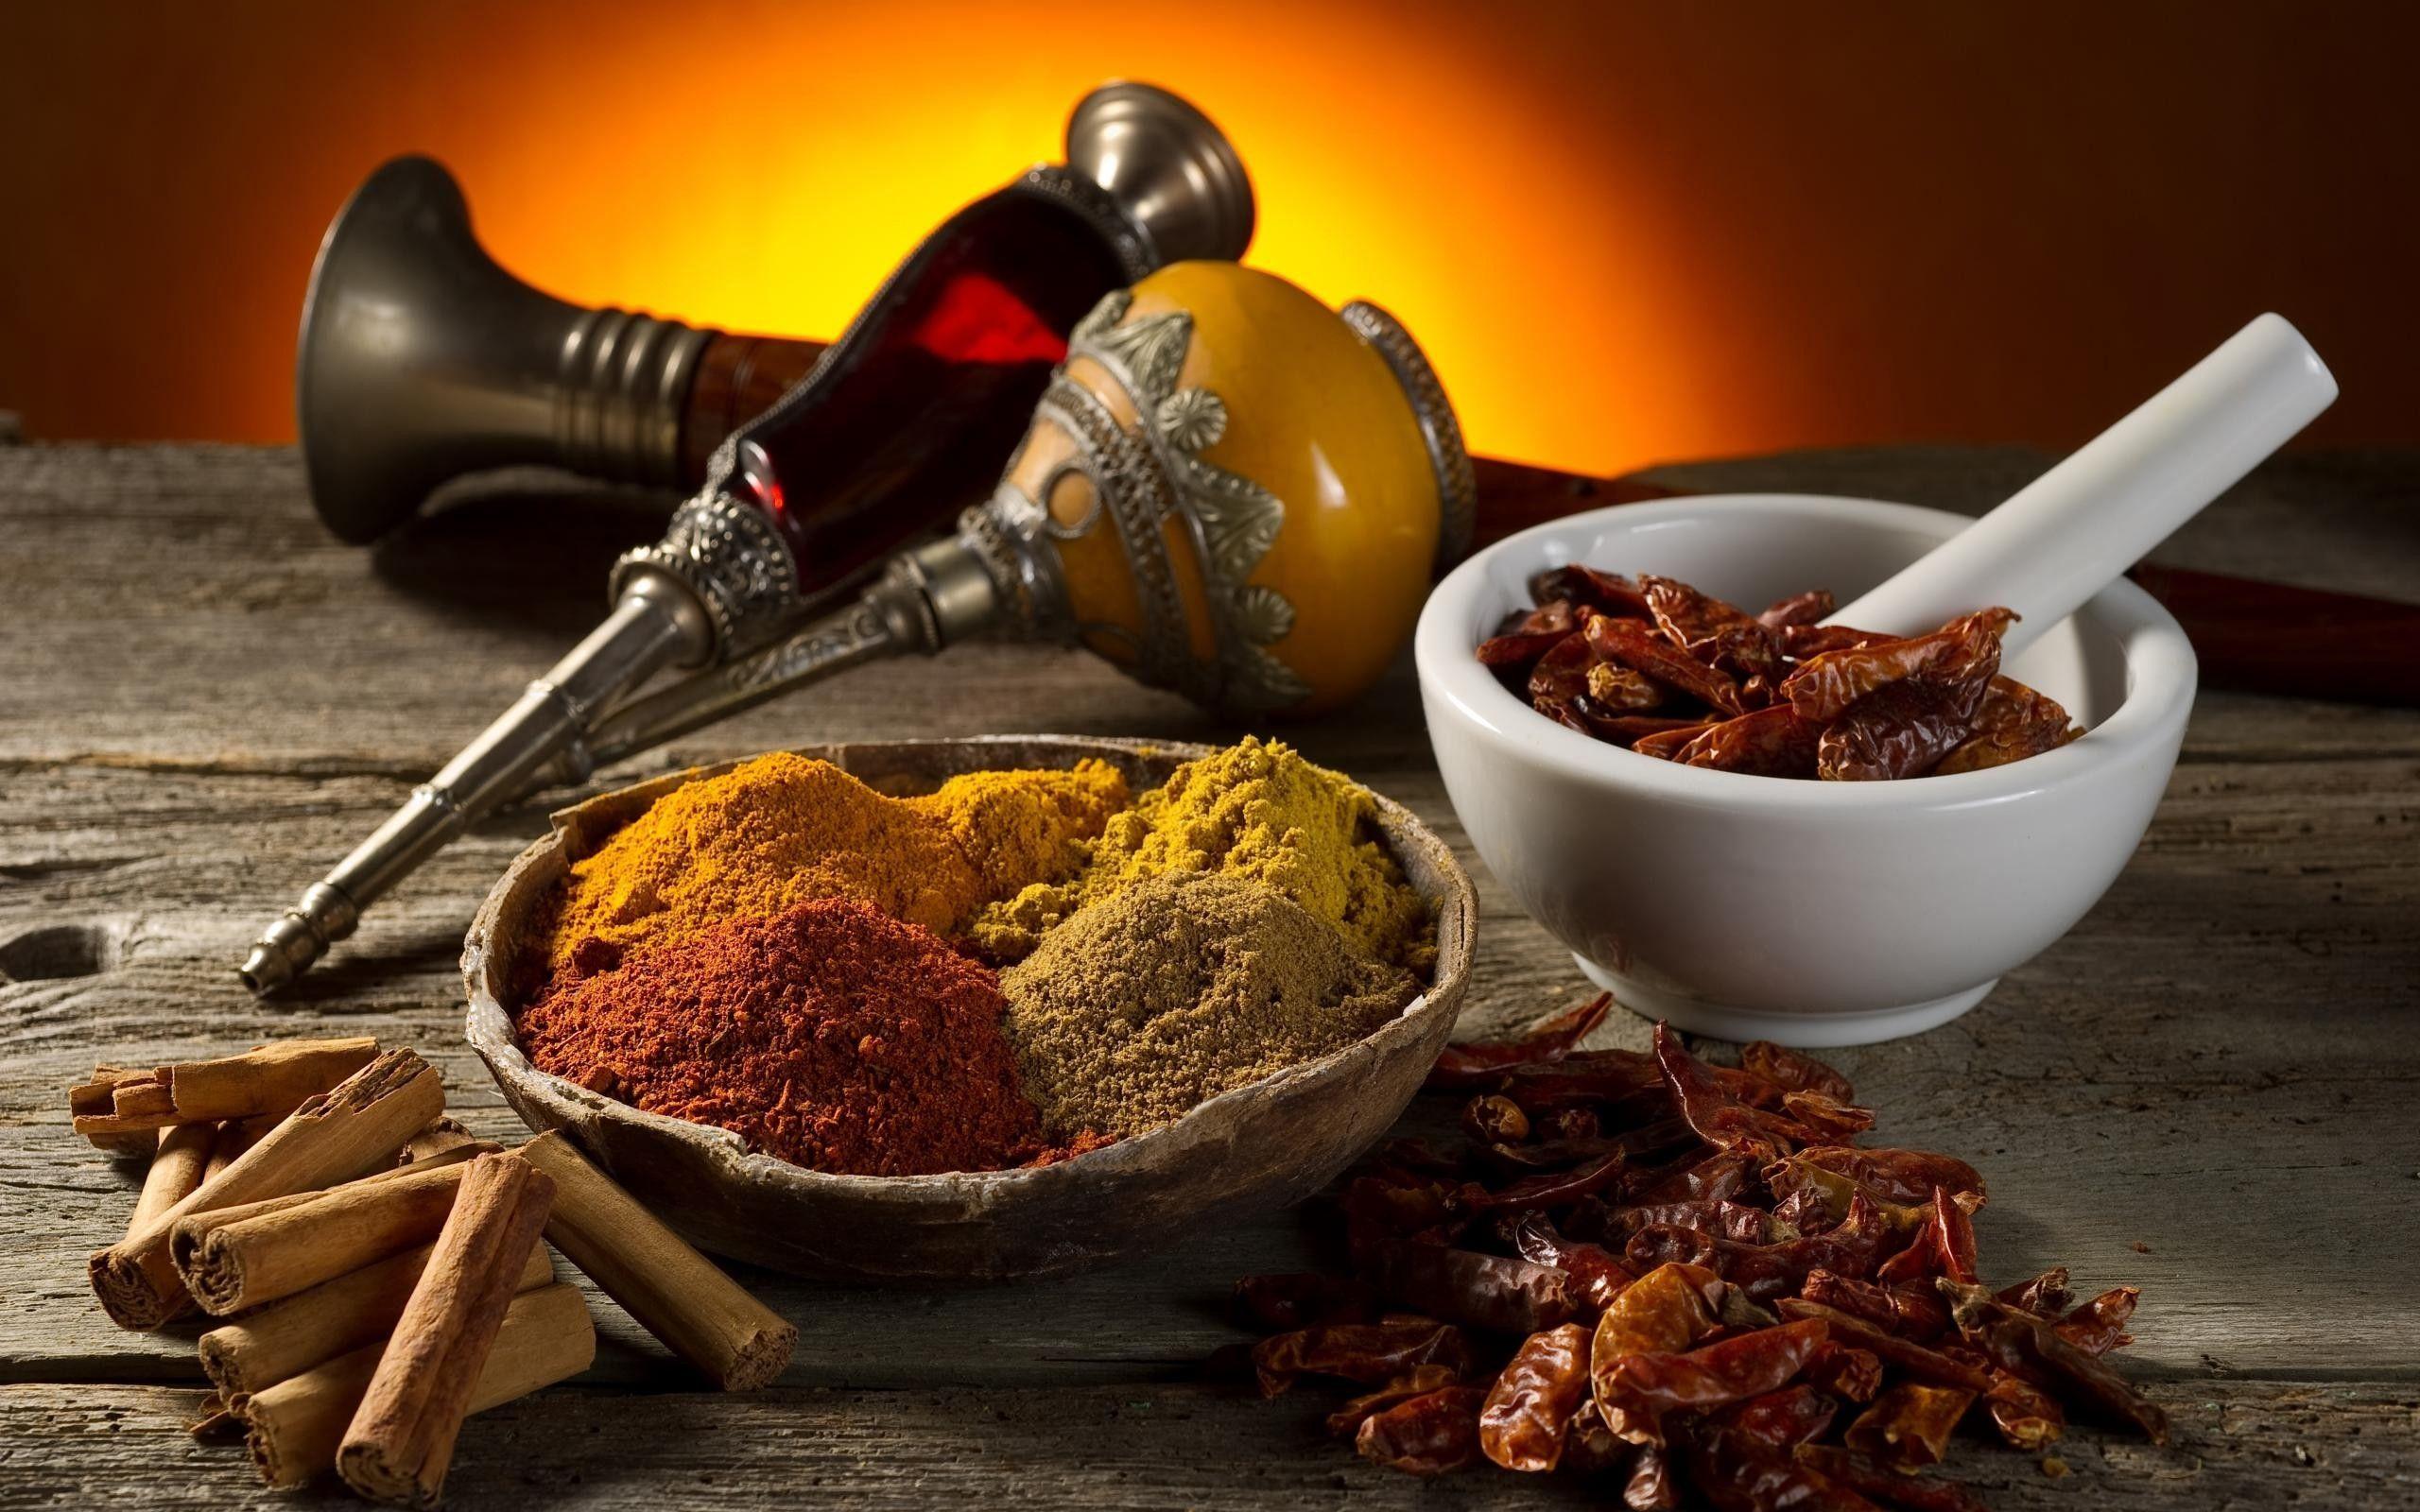 Download wallpaper 2560x1600 spices, sprinkles, dishes, table HD